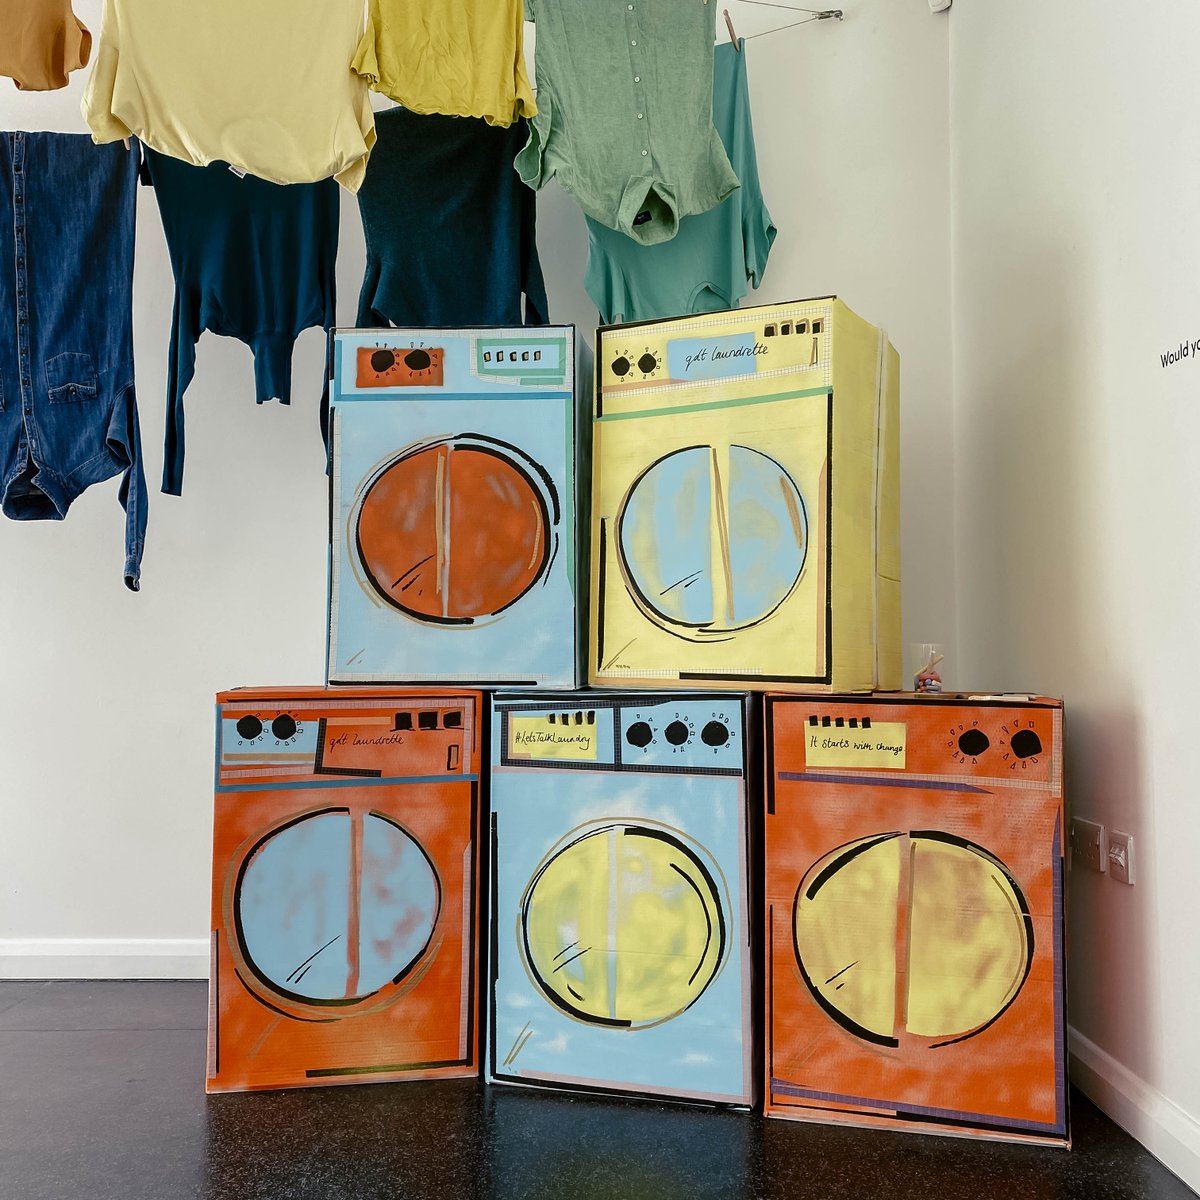 How brilliant are these machines created by @EstherSpringett in our creative laundry space at @brighton_cca's Dorset Place Gallery? #letstalklaundry Find out more here: quietdownthere.co.uk/dorset-place-c…